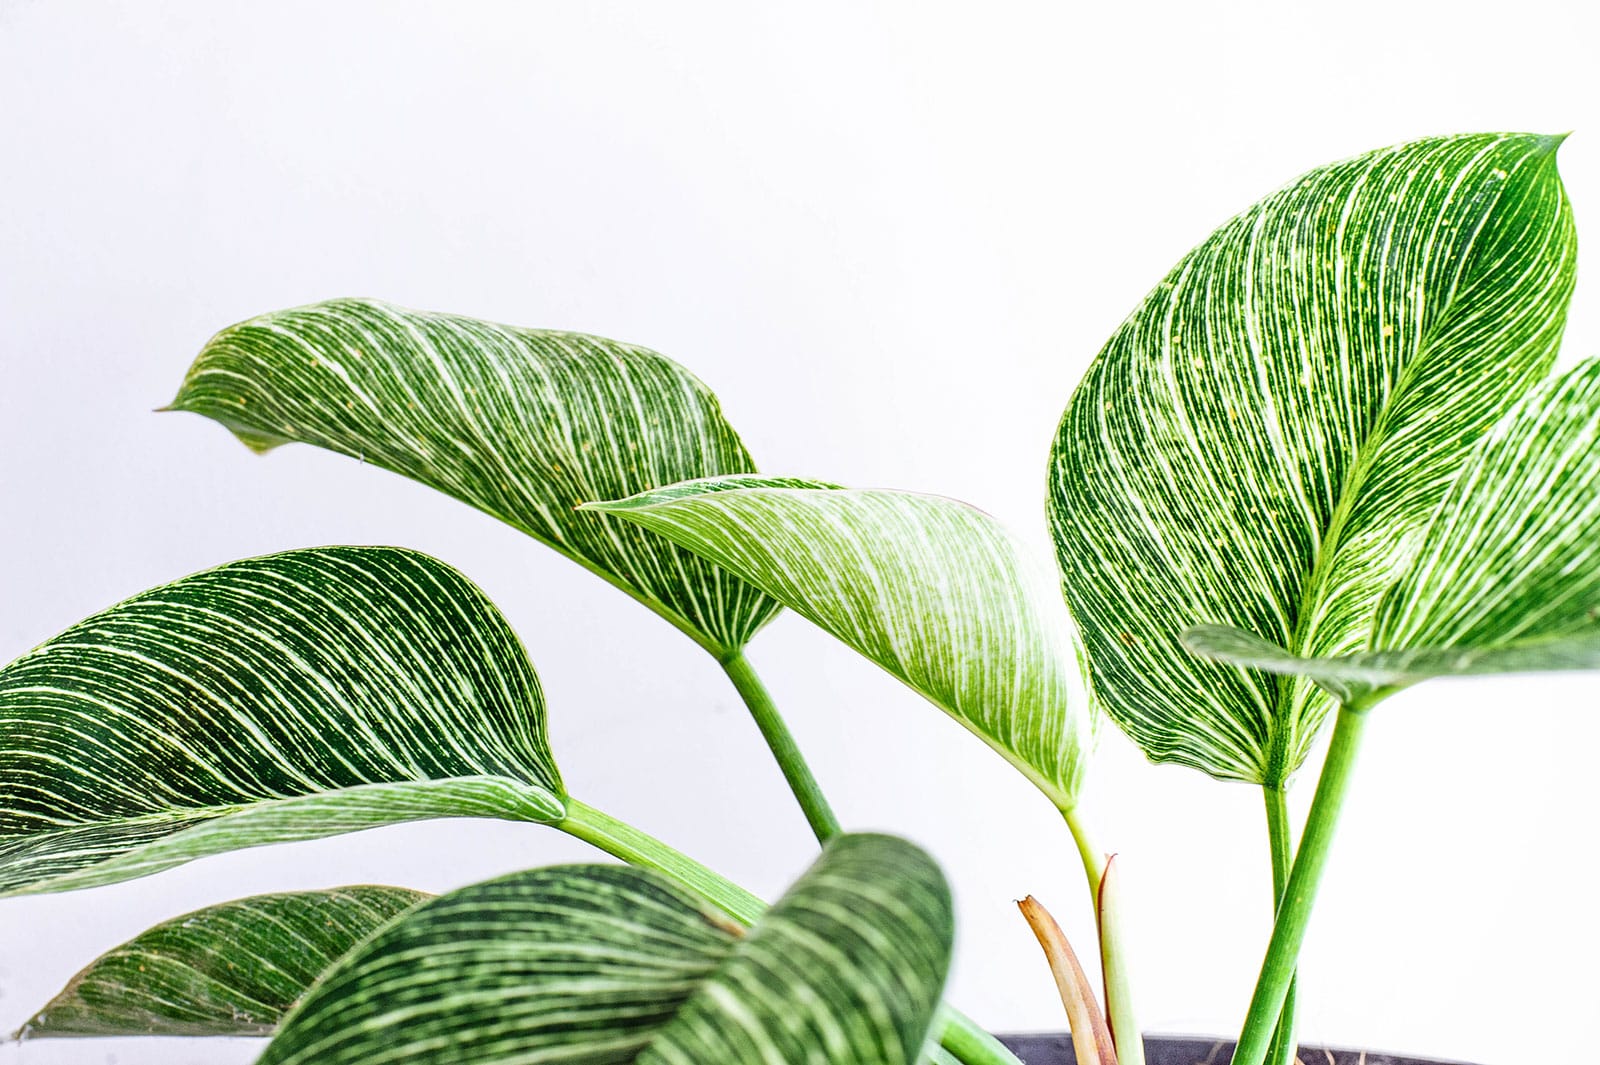 Highly striped Philodendron leaves shot against a white background